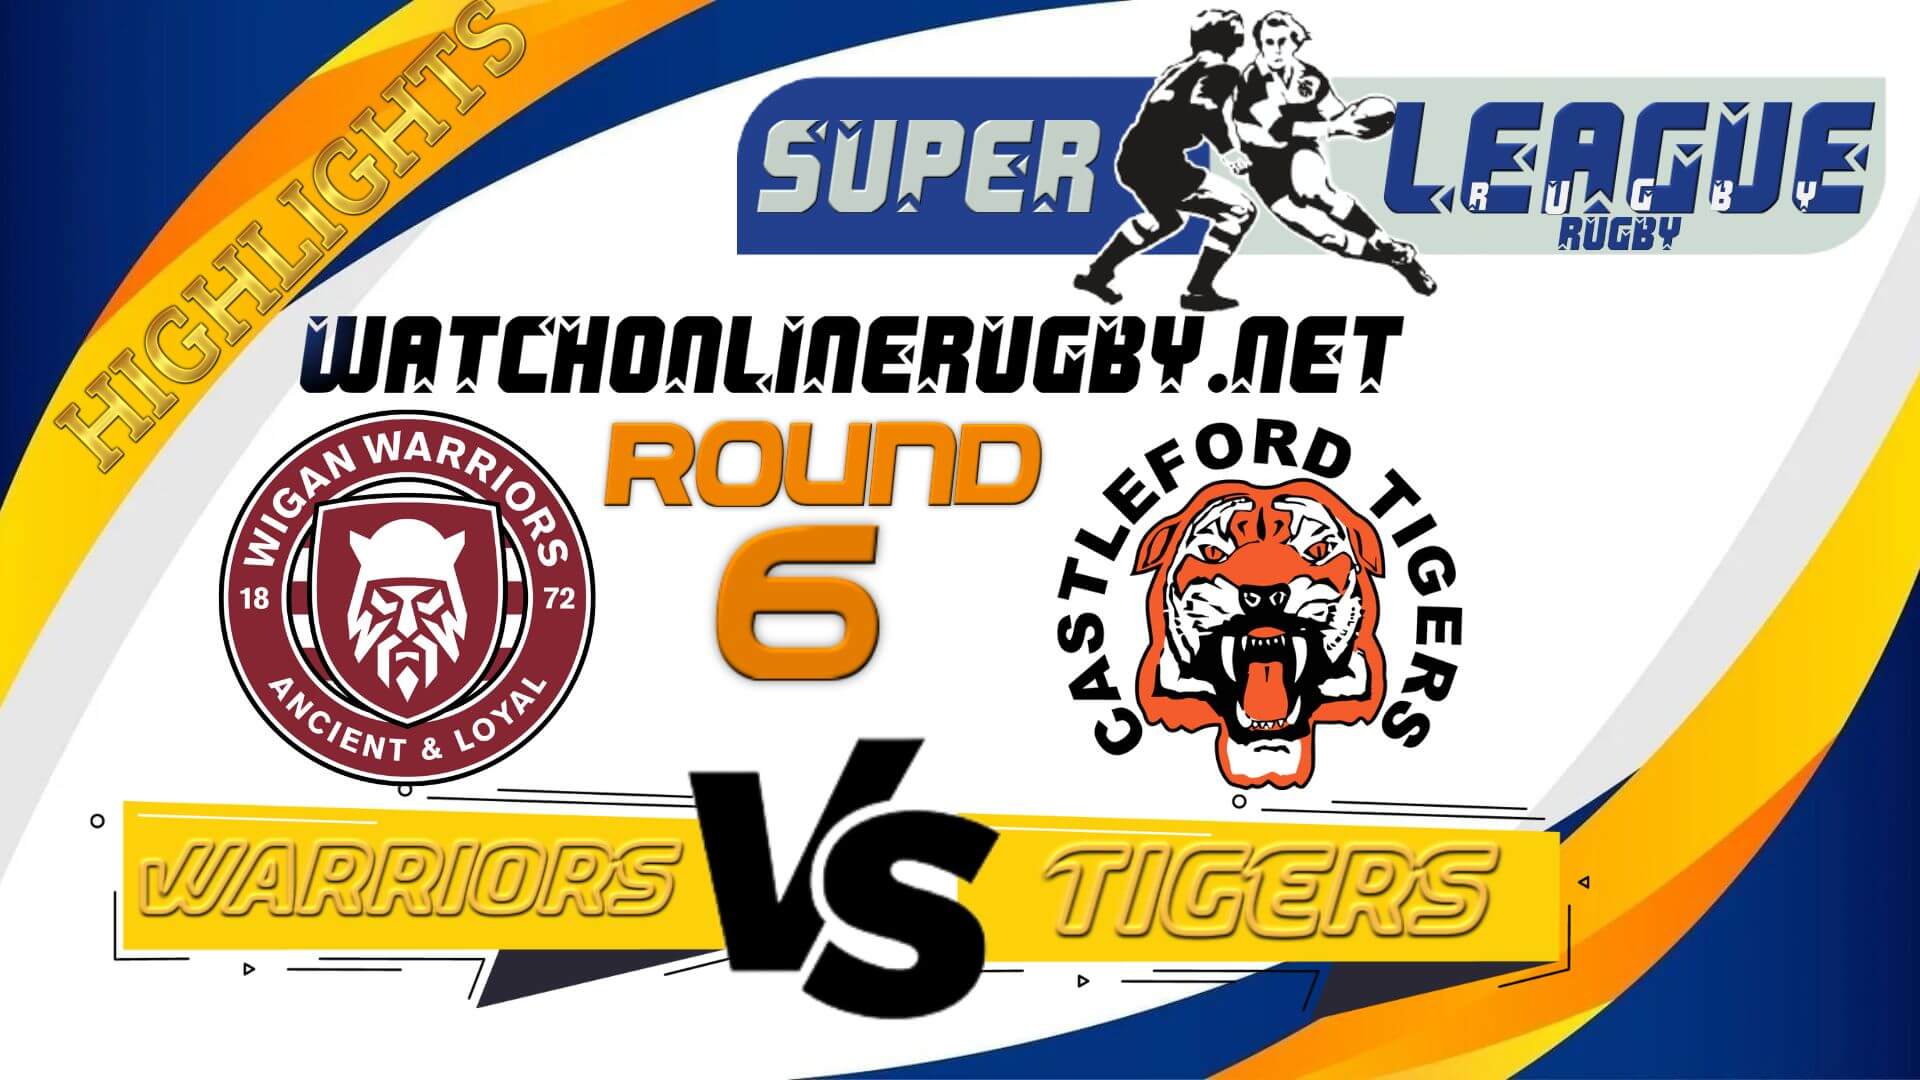 Wigan Warriors Vs Castleford Tigers Super League Rugby 2022 RD 6